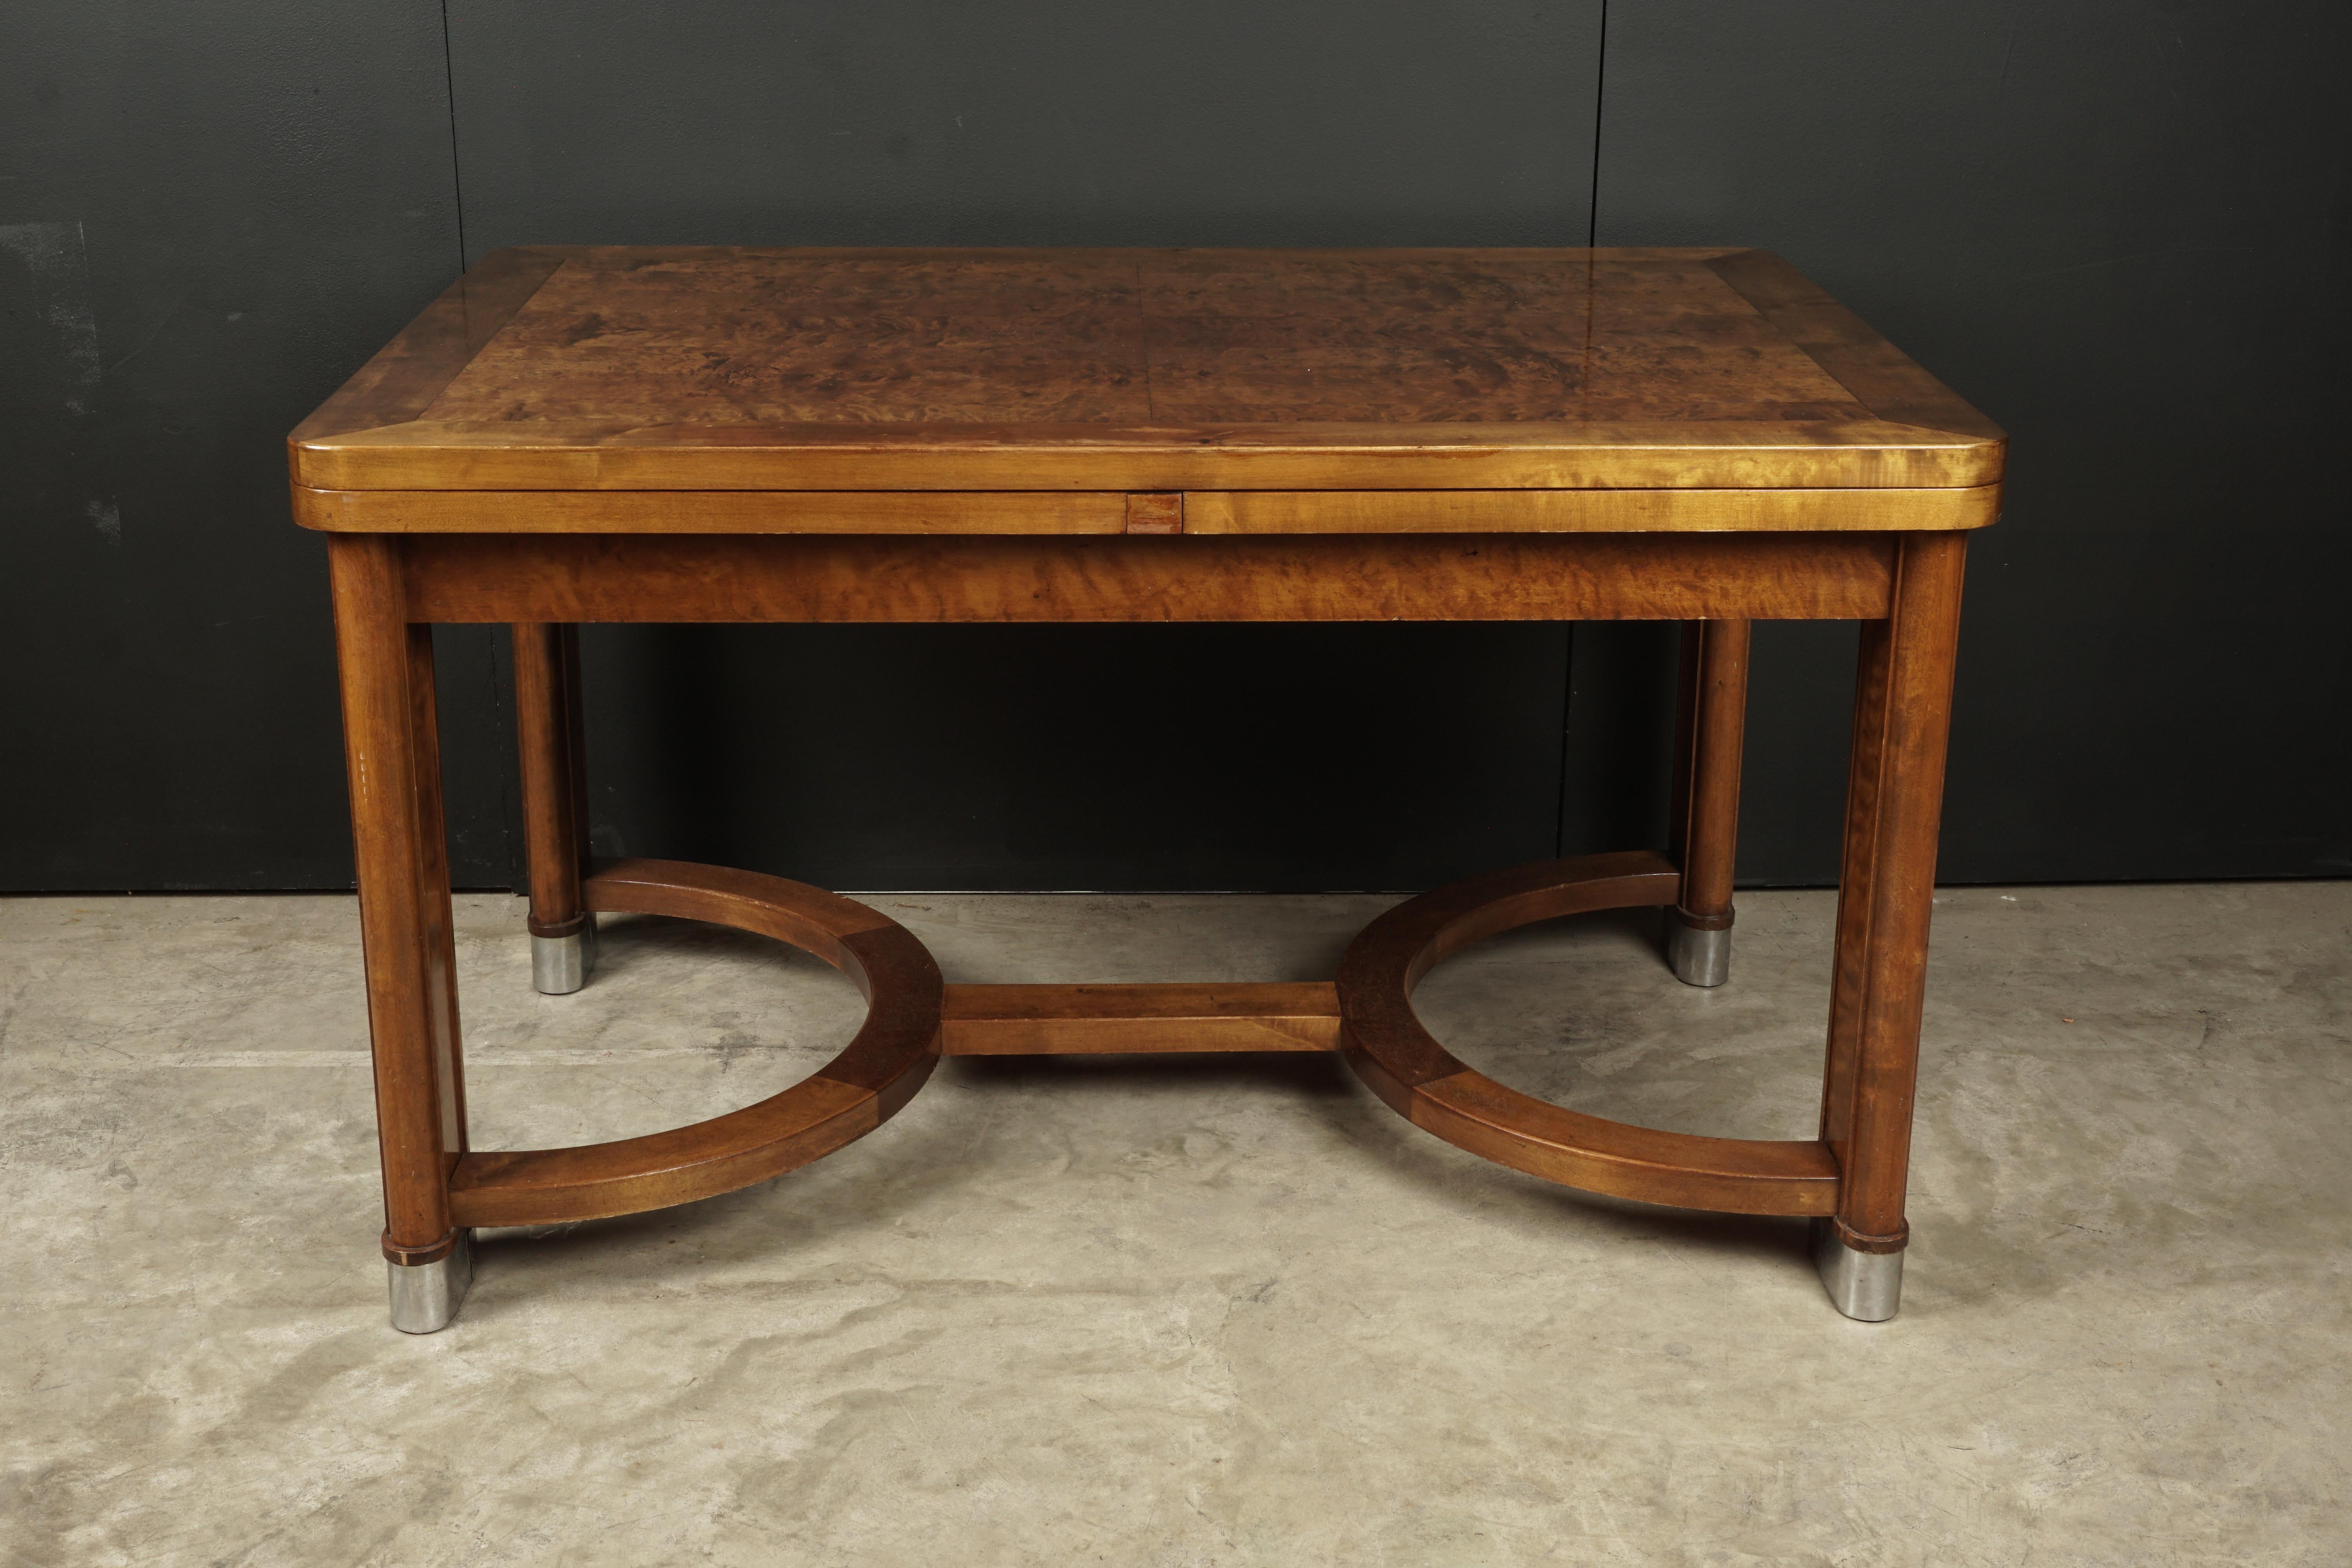 Rare Art Deco console table designed by Axel Nielsen, Denmark, 1928. Birch wood construction with profiled legs and metal feet. Leaves underneath extend.